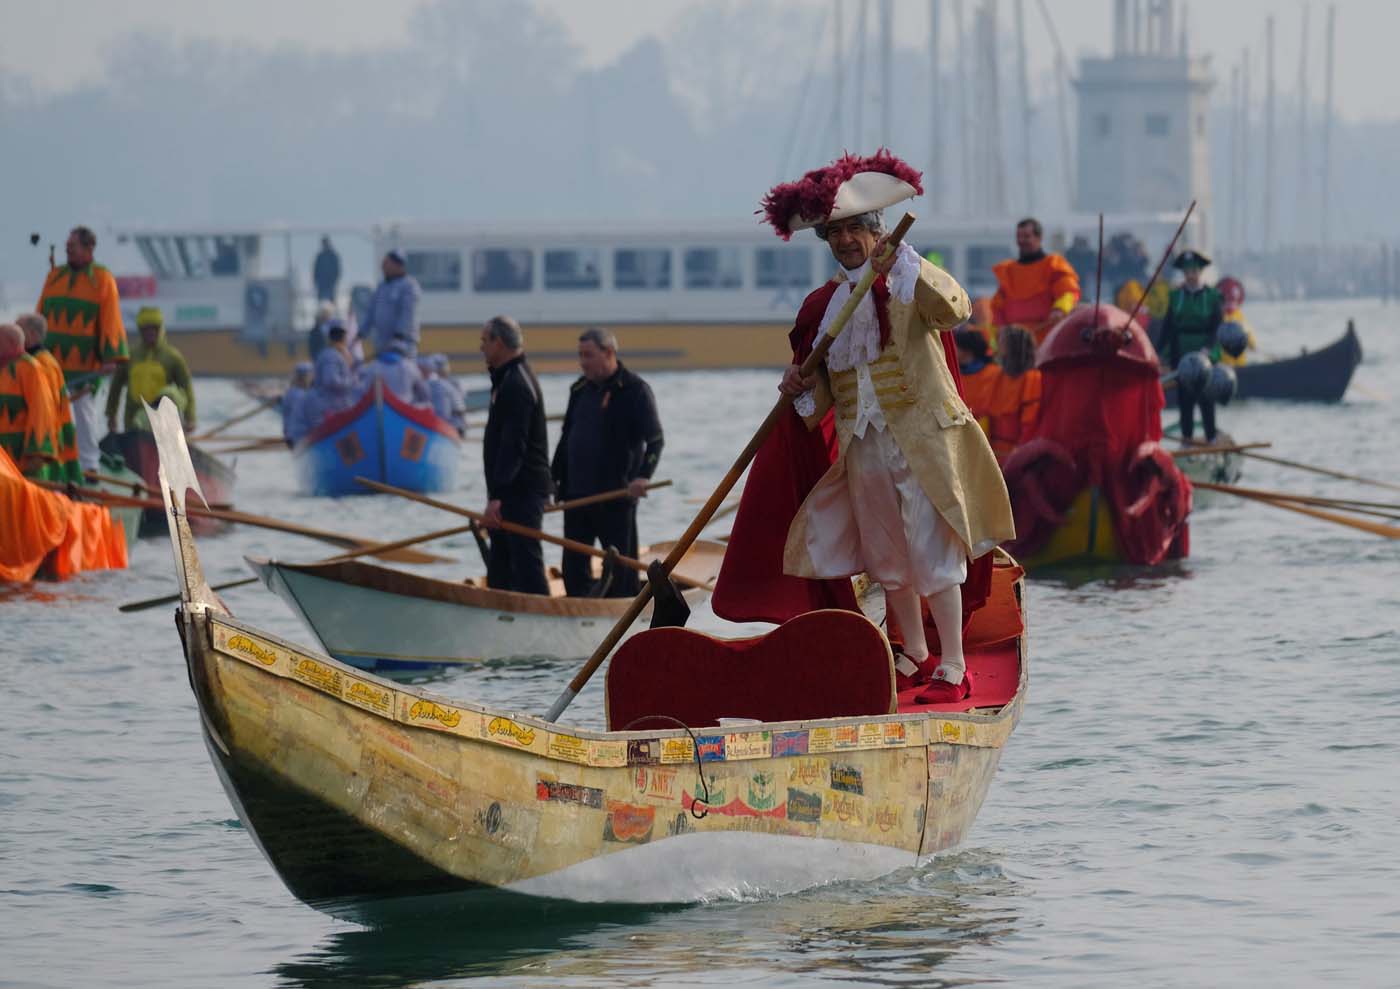 Venetians row during the masquerade parade on the Grand Canal during the Carnival in Venice, Italy January 28, 2018. REUTERS/Manuel Silvestri